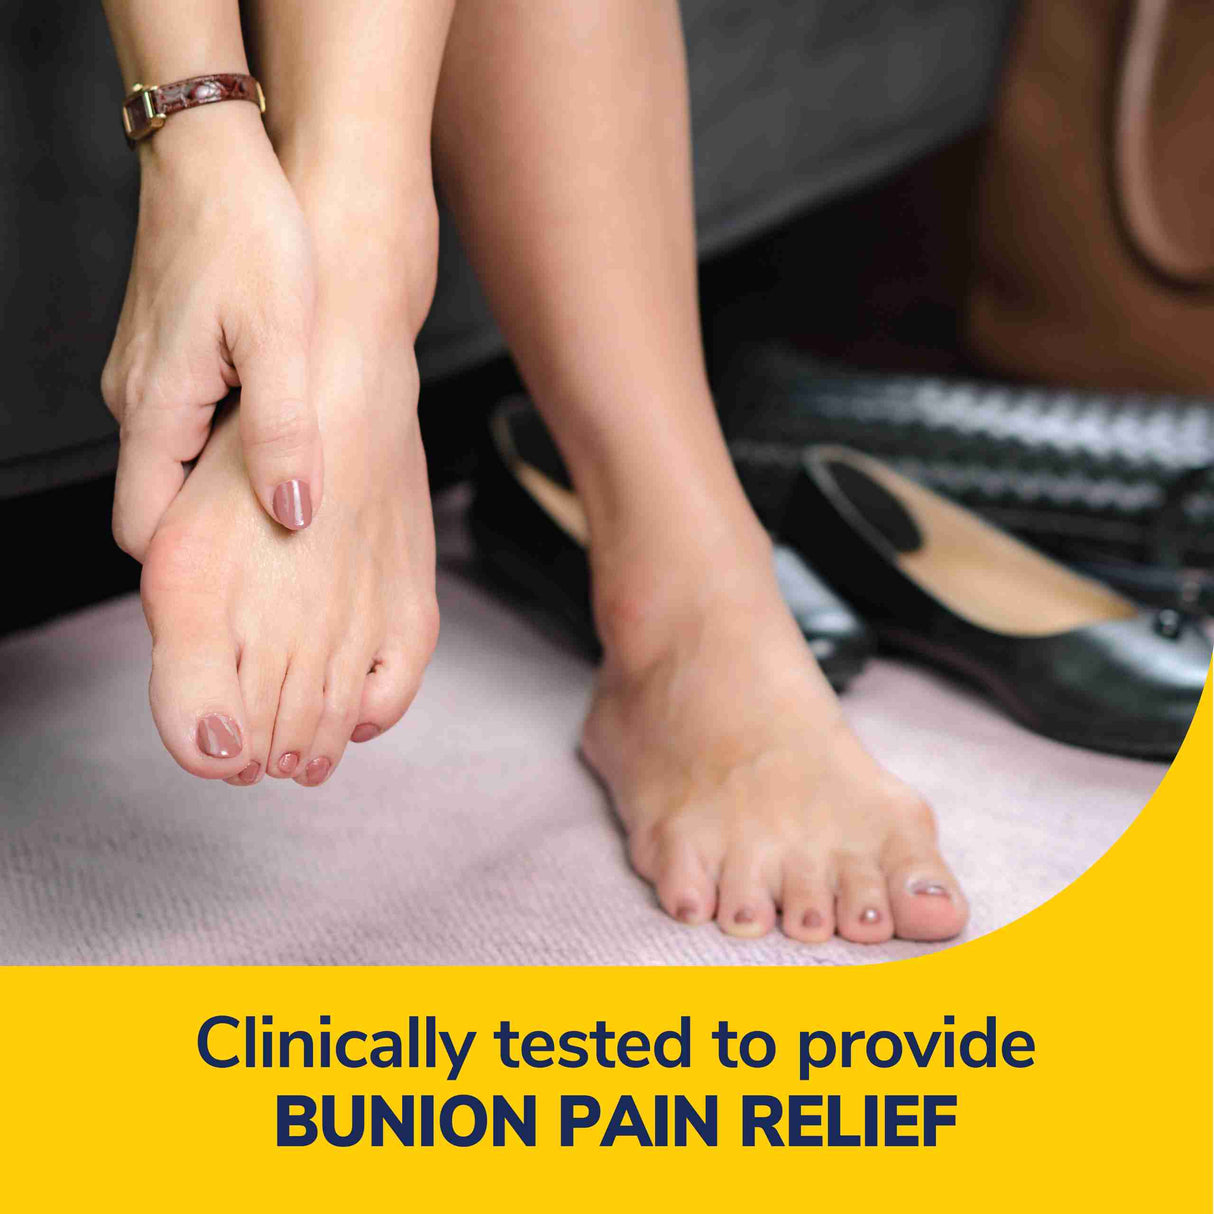 image of clinically tested to provide bunion pain relief